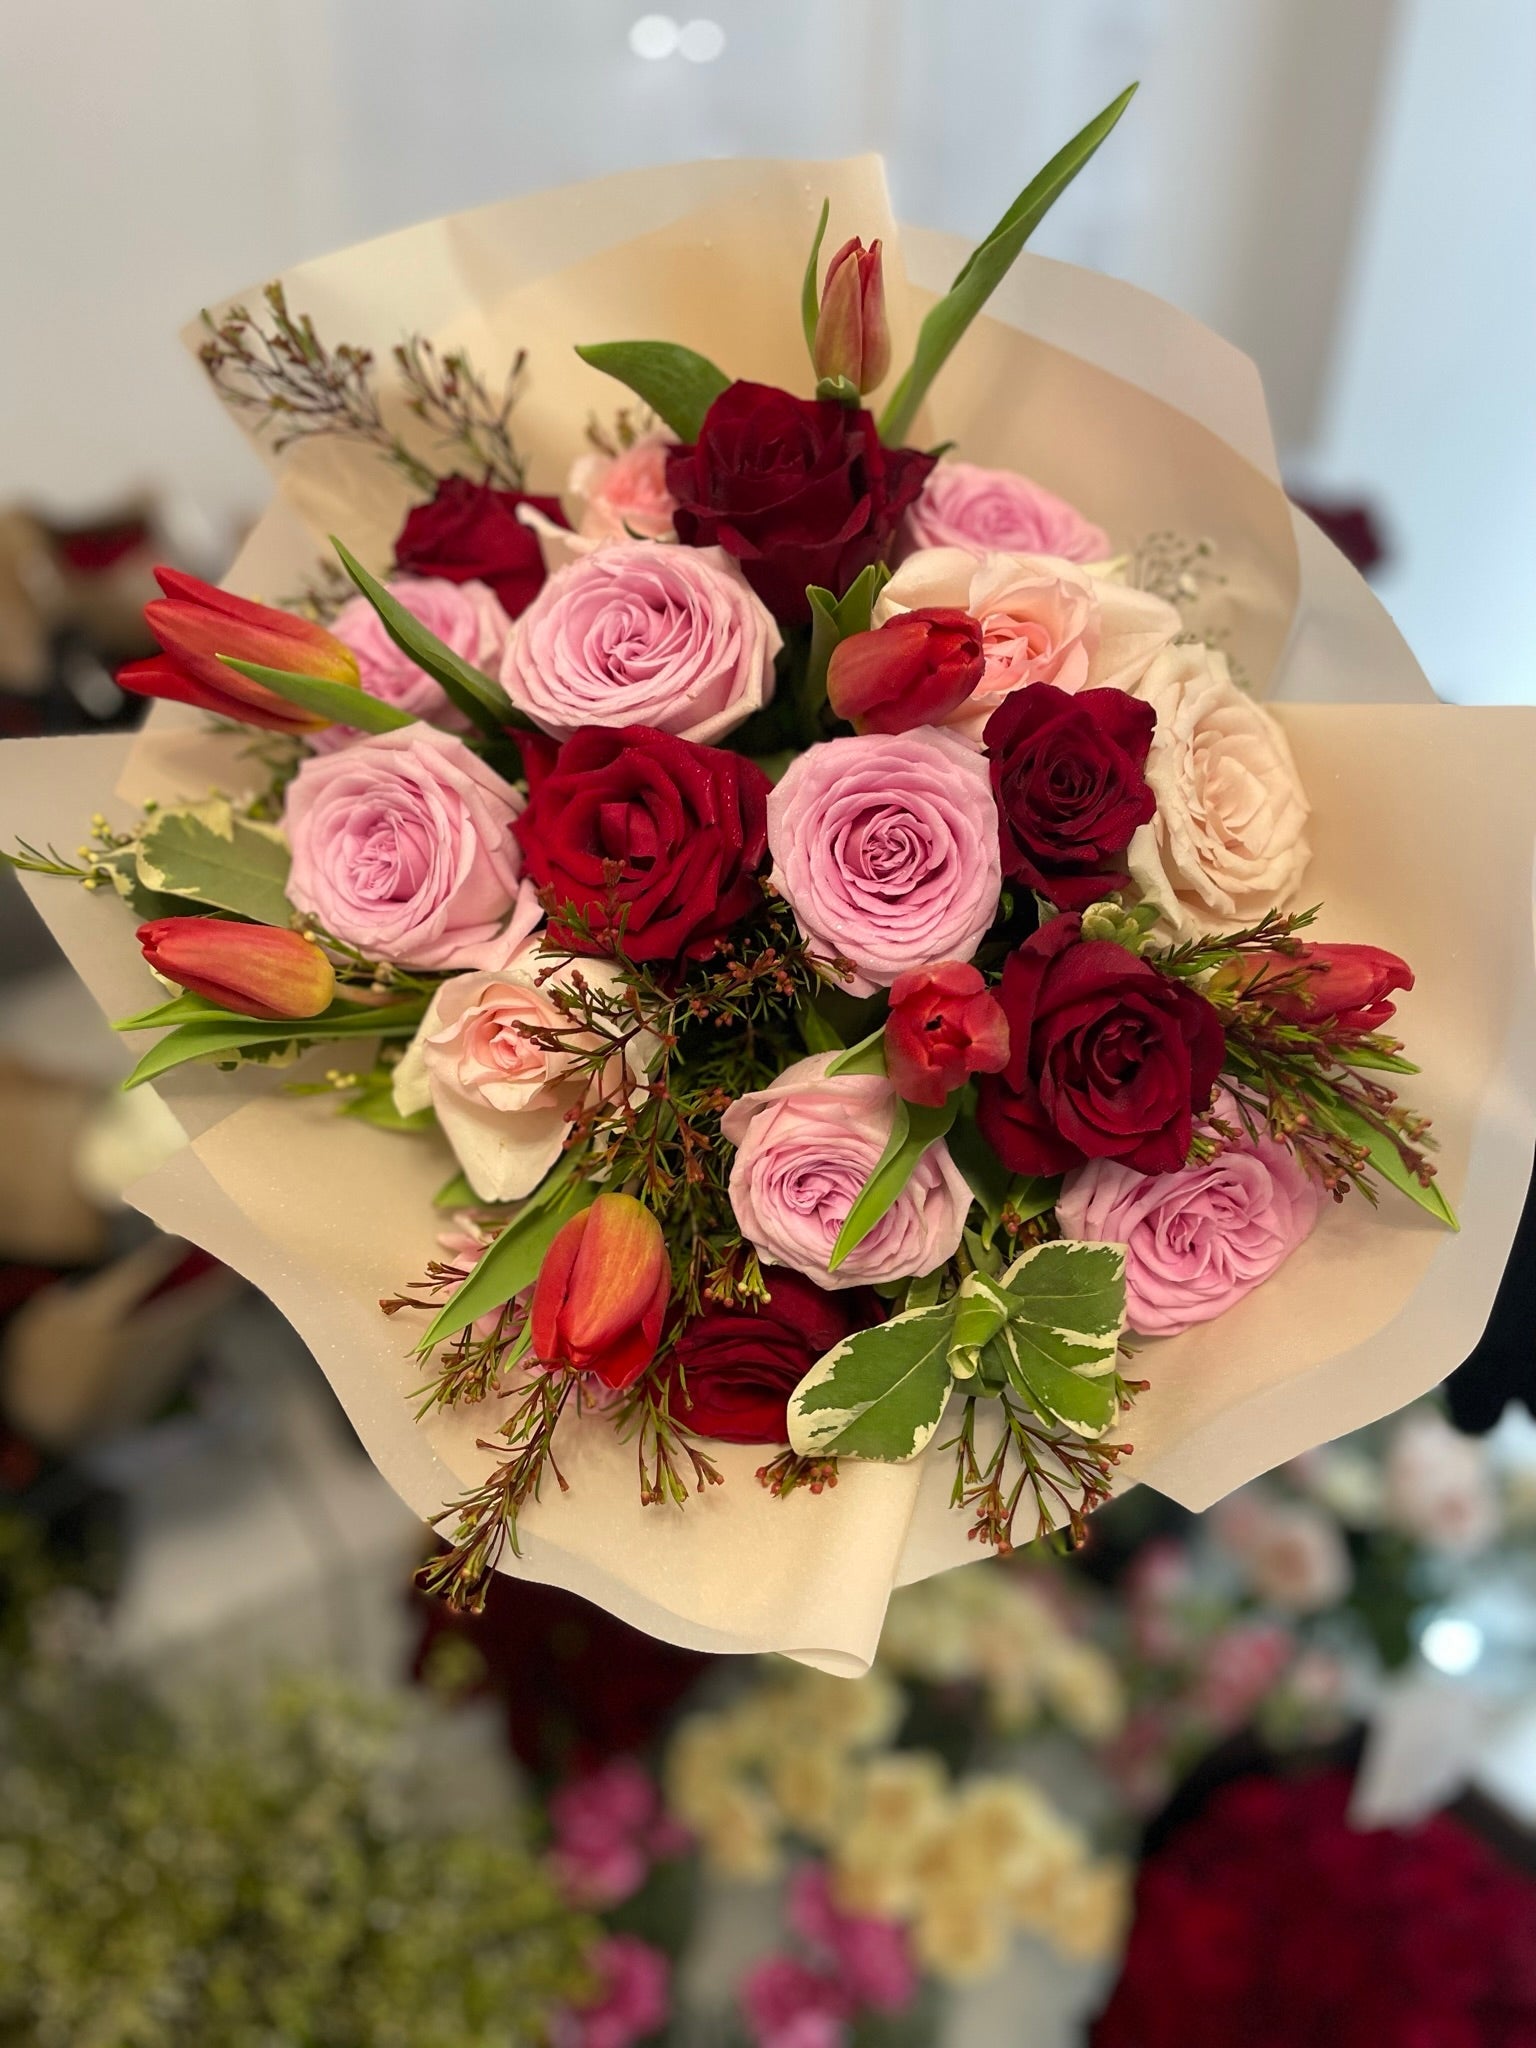 Pink and red roses with tulips